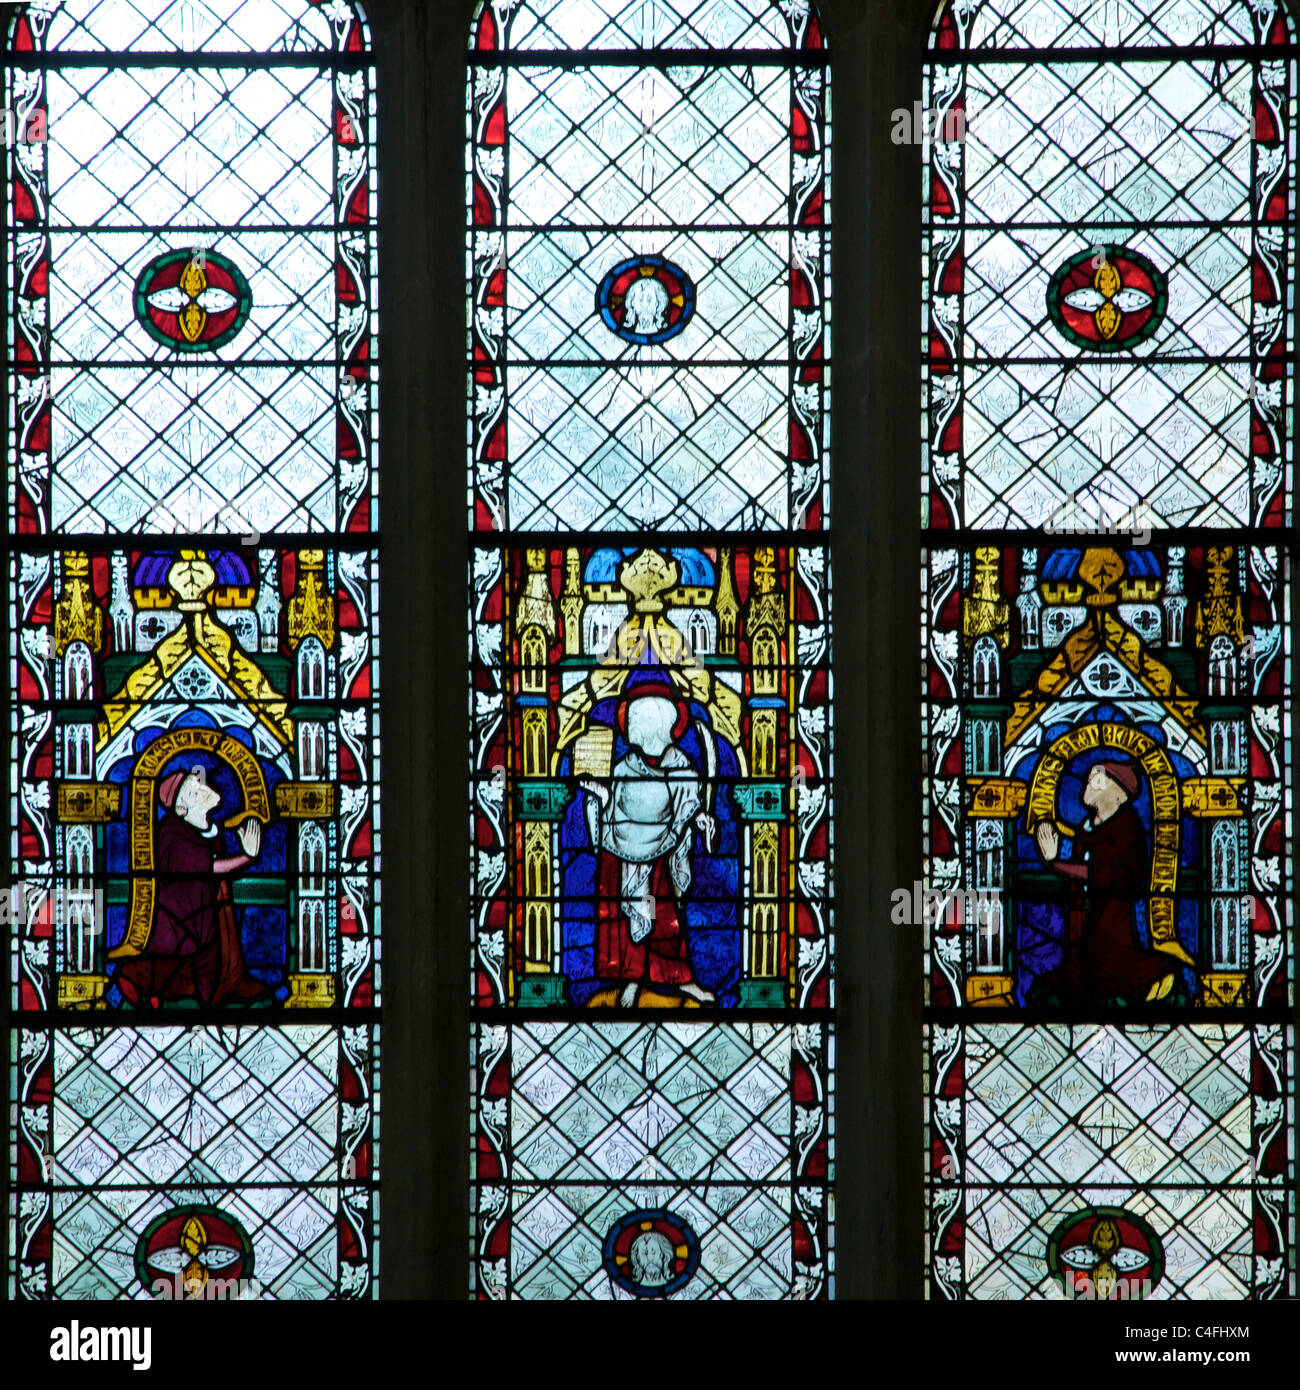 13th and 14th Century stained glass windows, Saints with kneeling patrons, Merton College Chapel, Oxford University, Oxford, UK Stock Photo